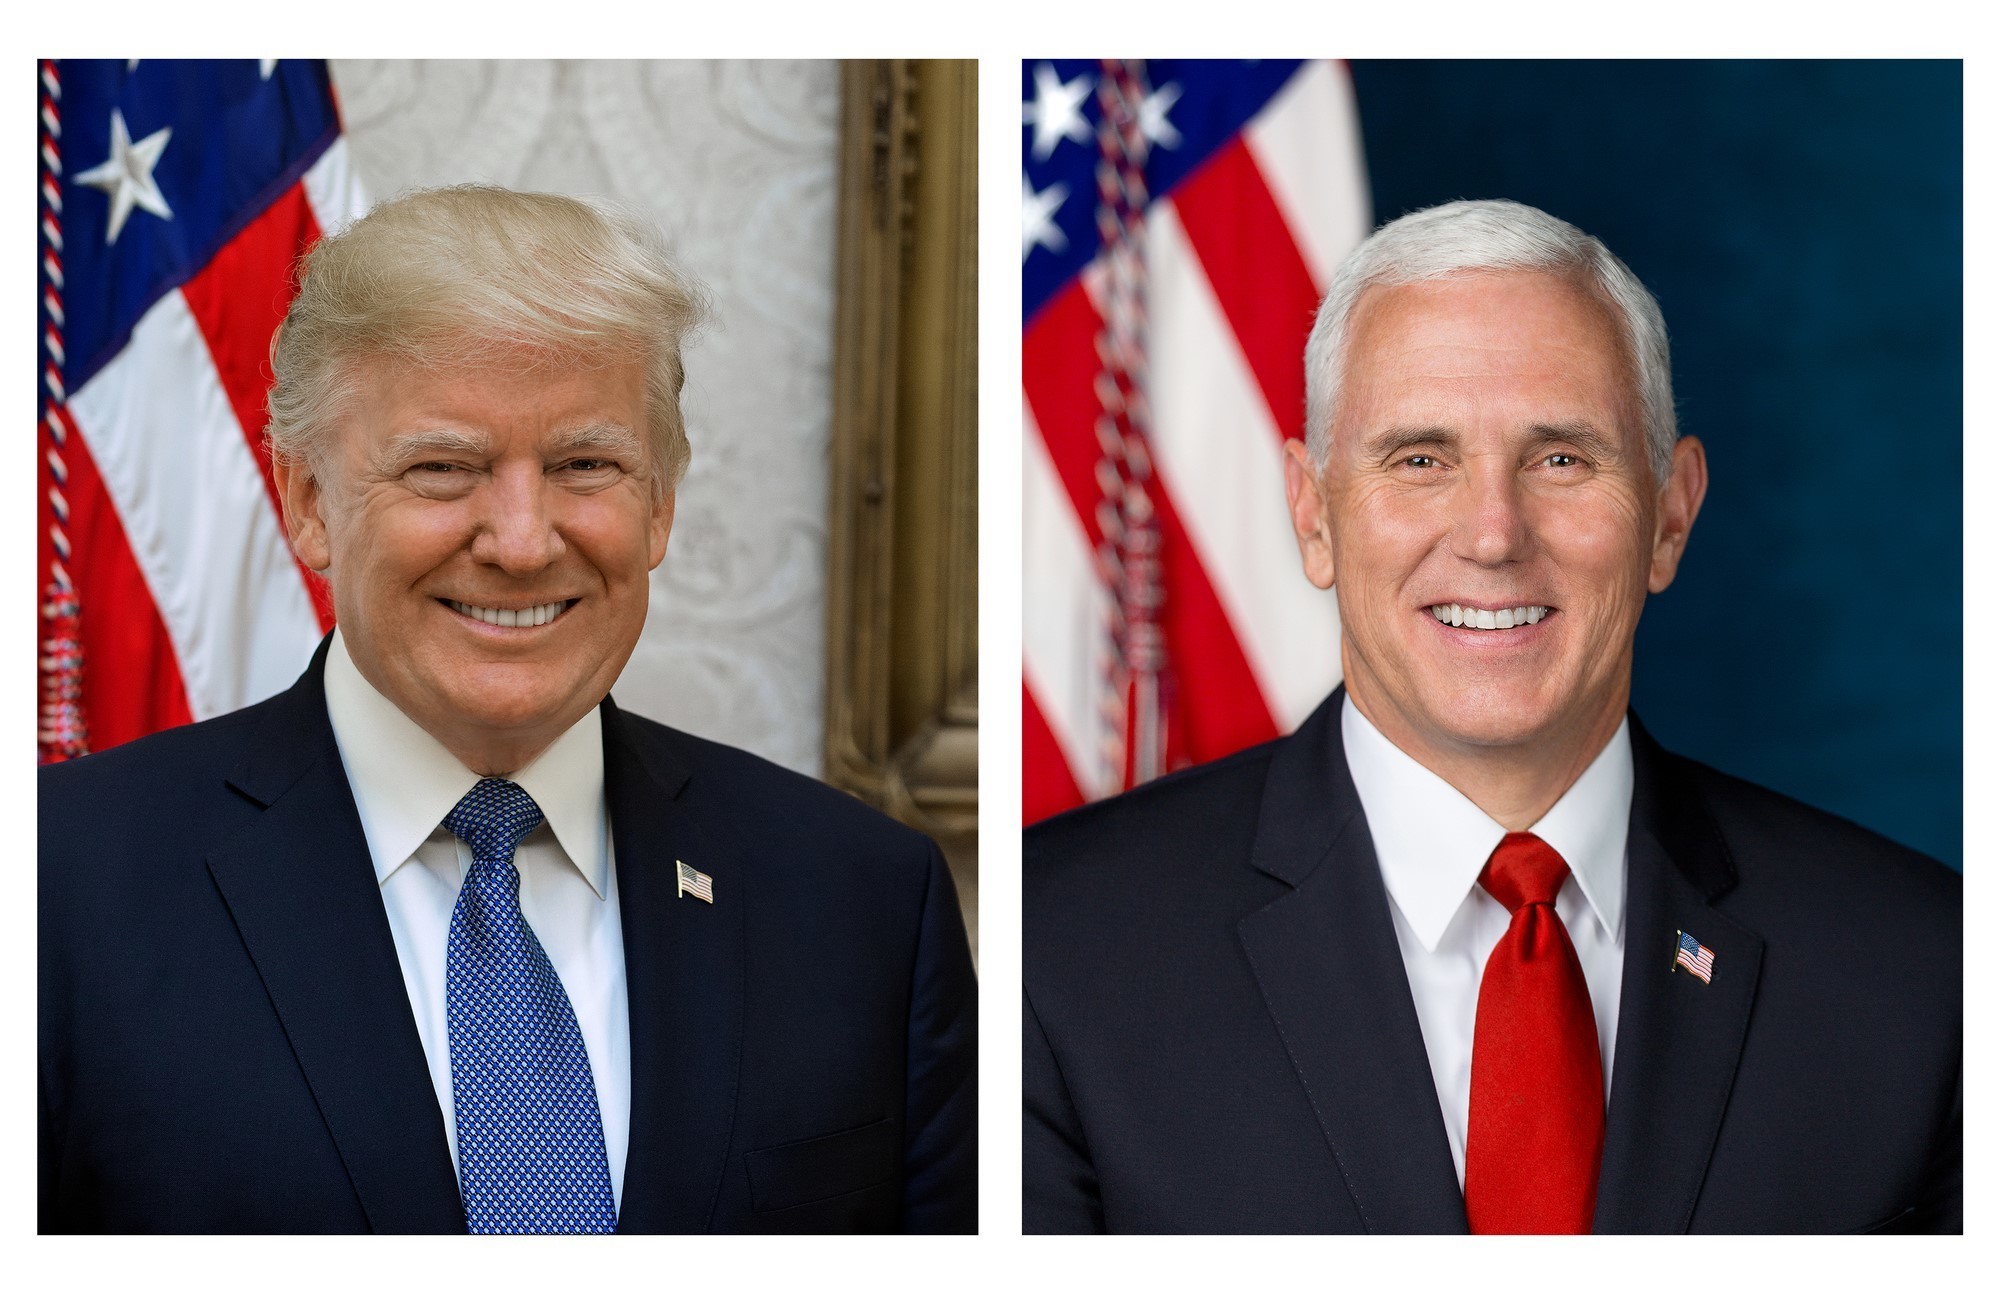 White House Releases Official Trump And Pence Portraits